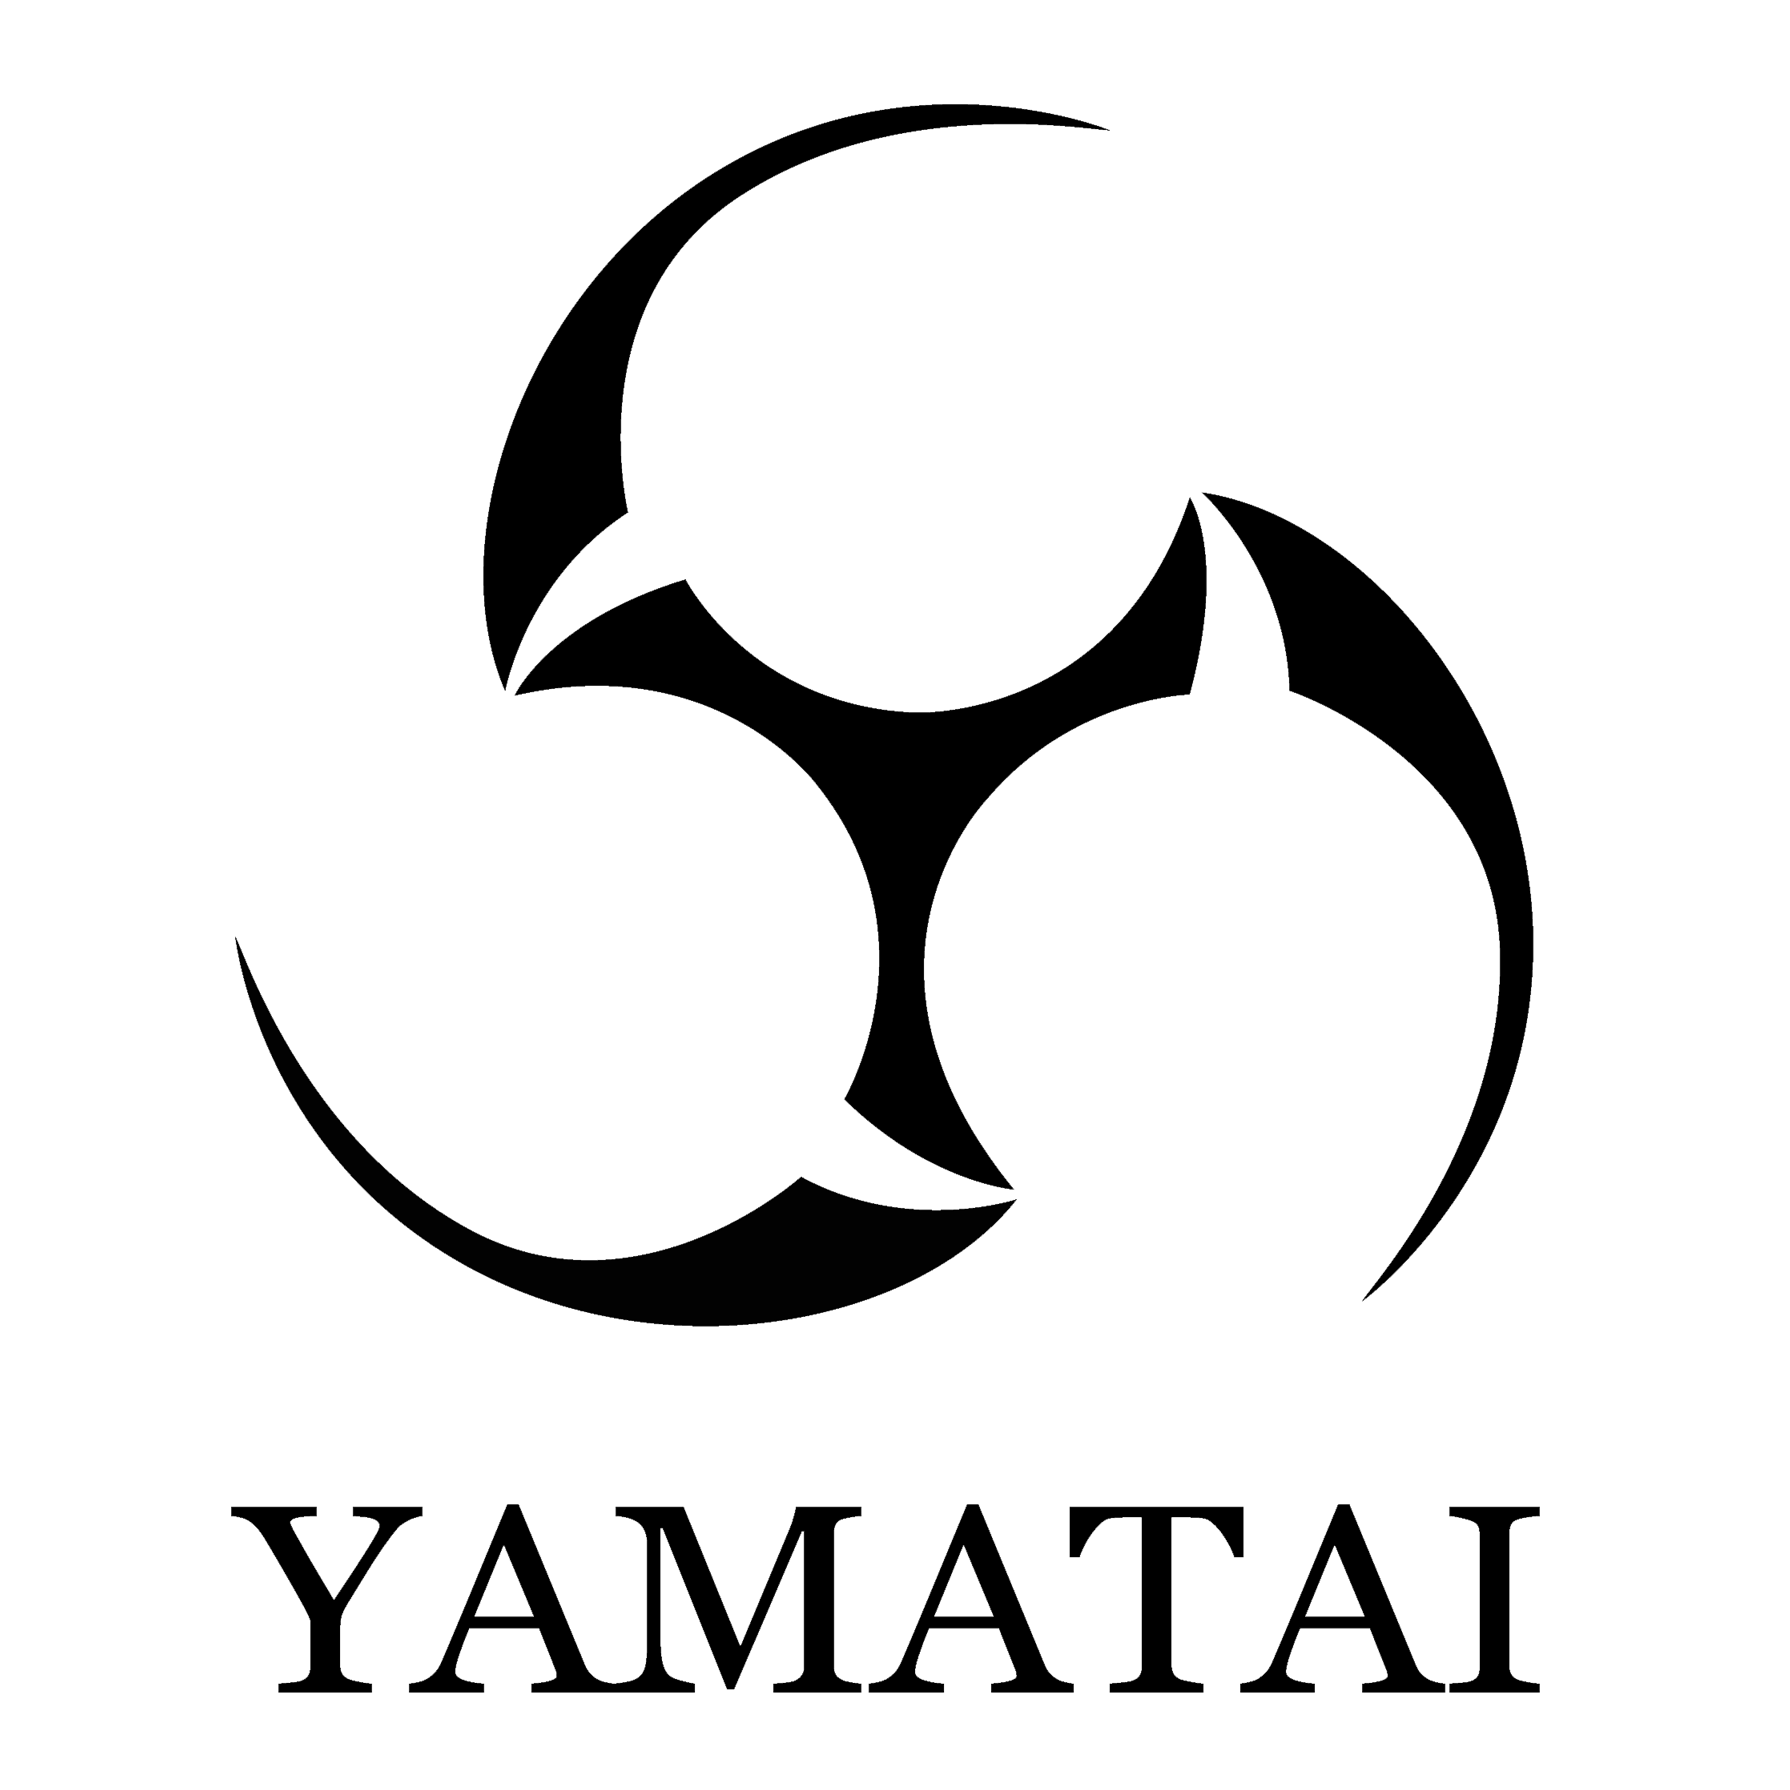 Yamatai is Cornell's one and only taiko drumming group devoted to playing and spreading the art of taiko.